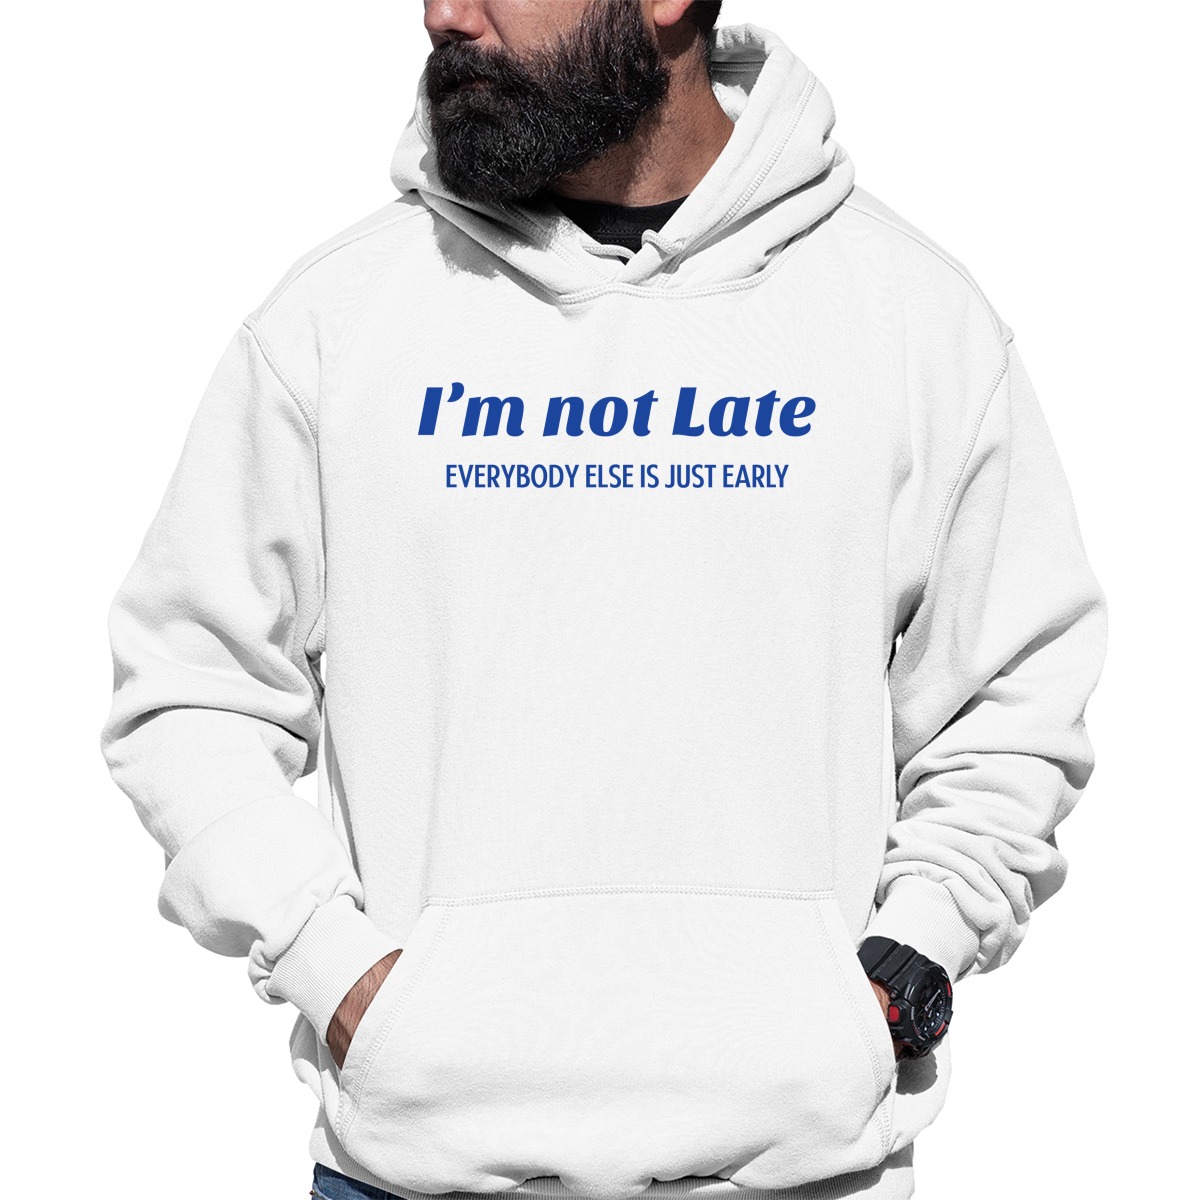 I’m not late everybody else is just early Unisex Hoodie | White